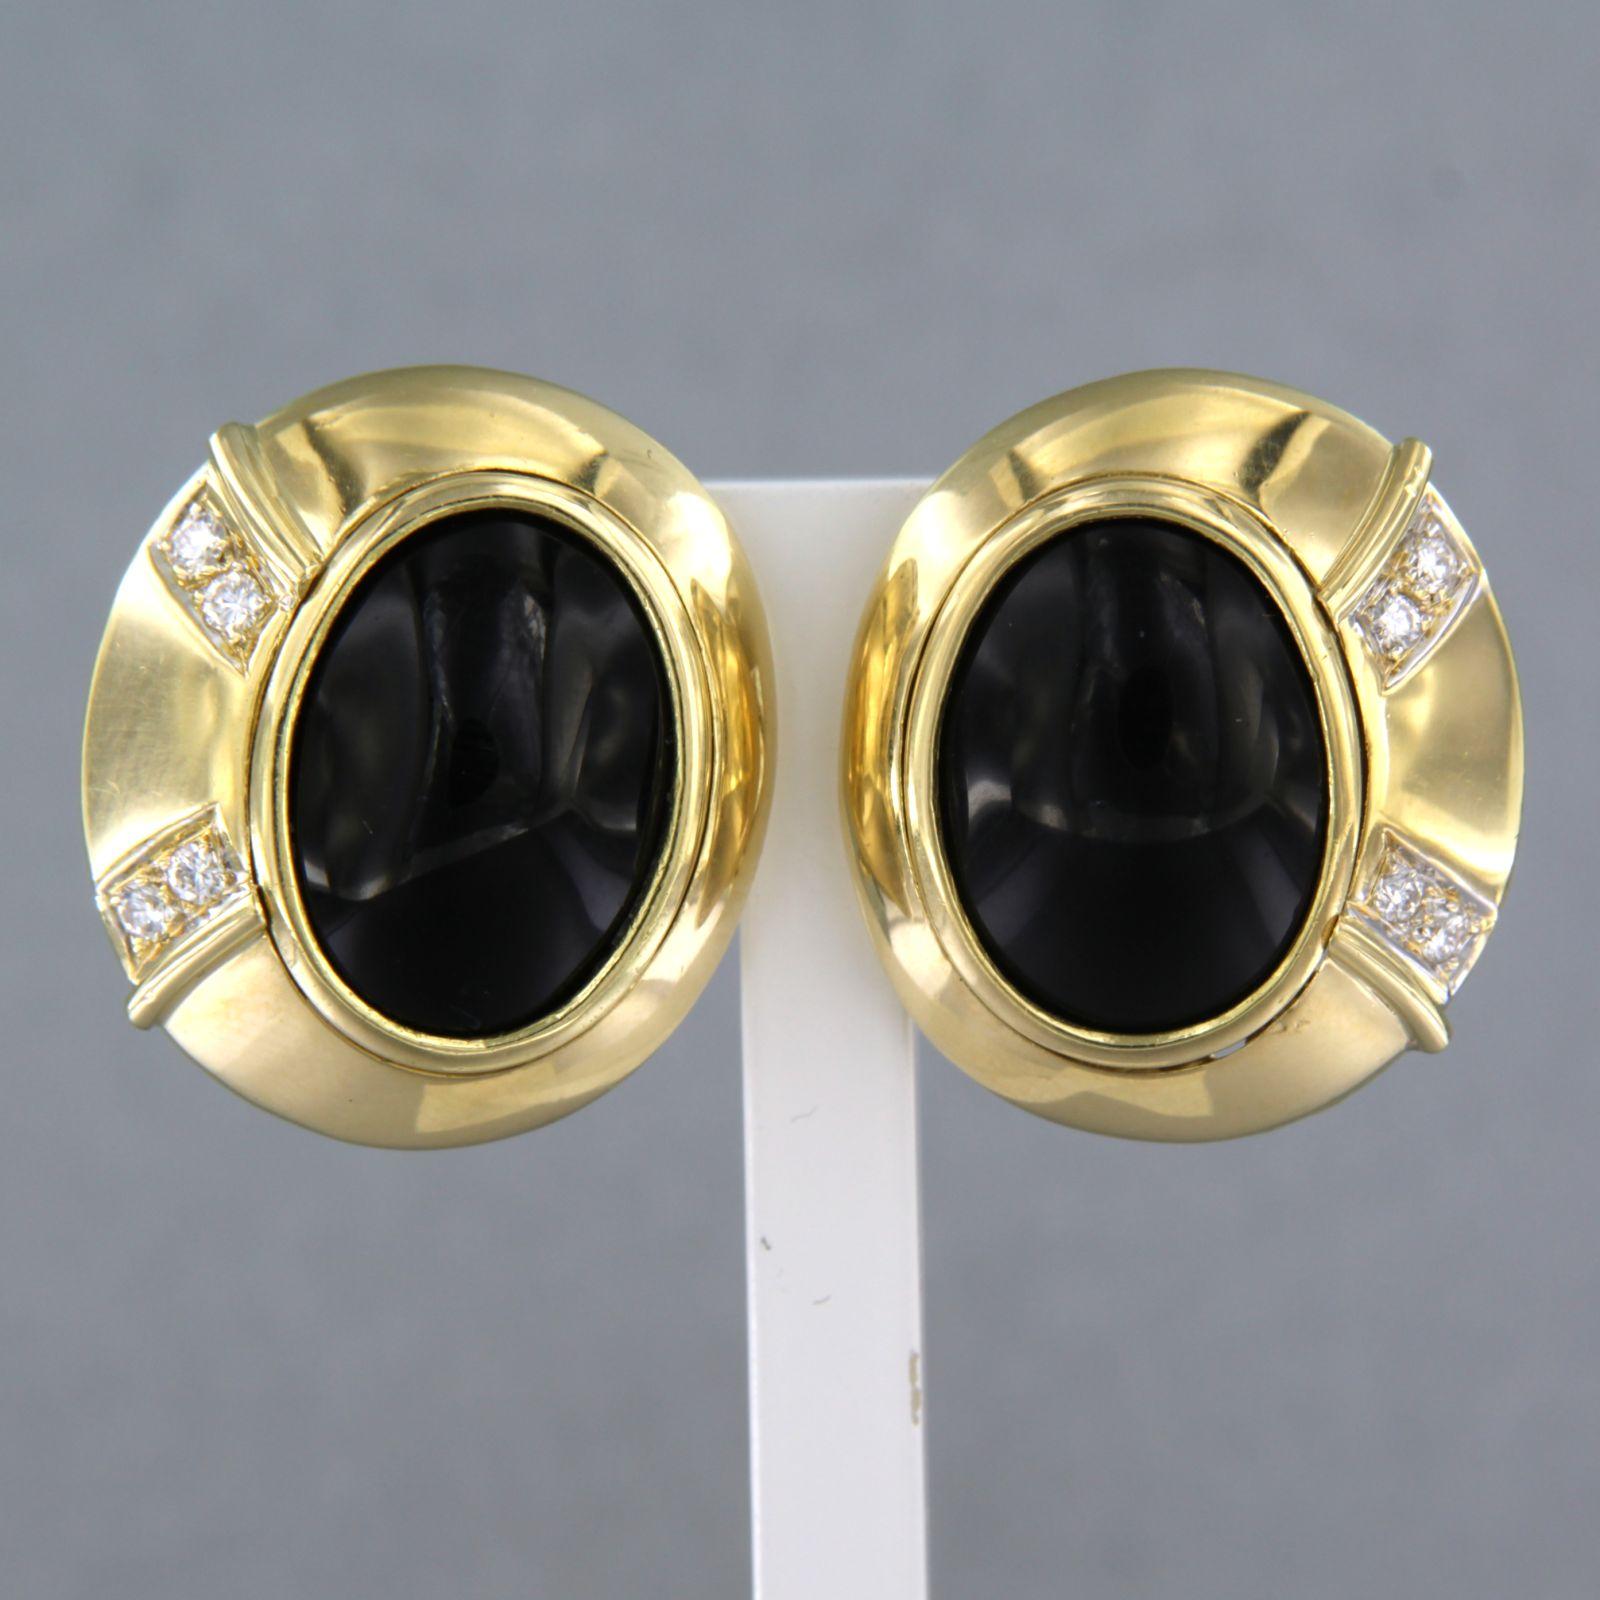 18k yellow gold clip-on earrings set with onyx and brilliant cut diamonds. 0.20ct - G/H - VS/SI

detailed description:

the size of the earring is 2.2 cm long by 1.9 cm wide

weight 18.5 grams

set with

- 2 x 1.5 cm x 1.1 cm oval cabochon cut